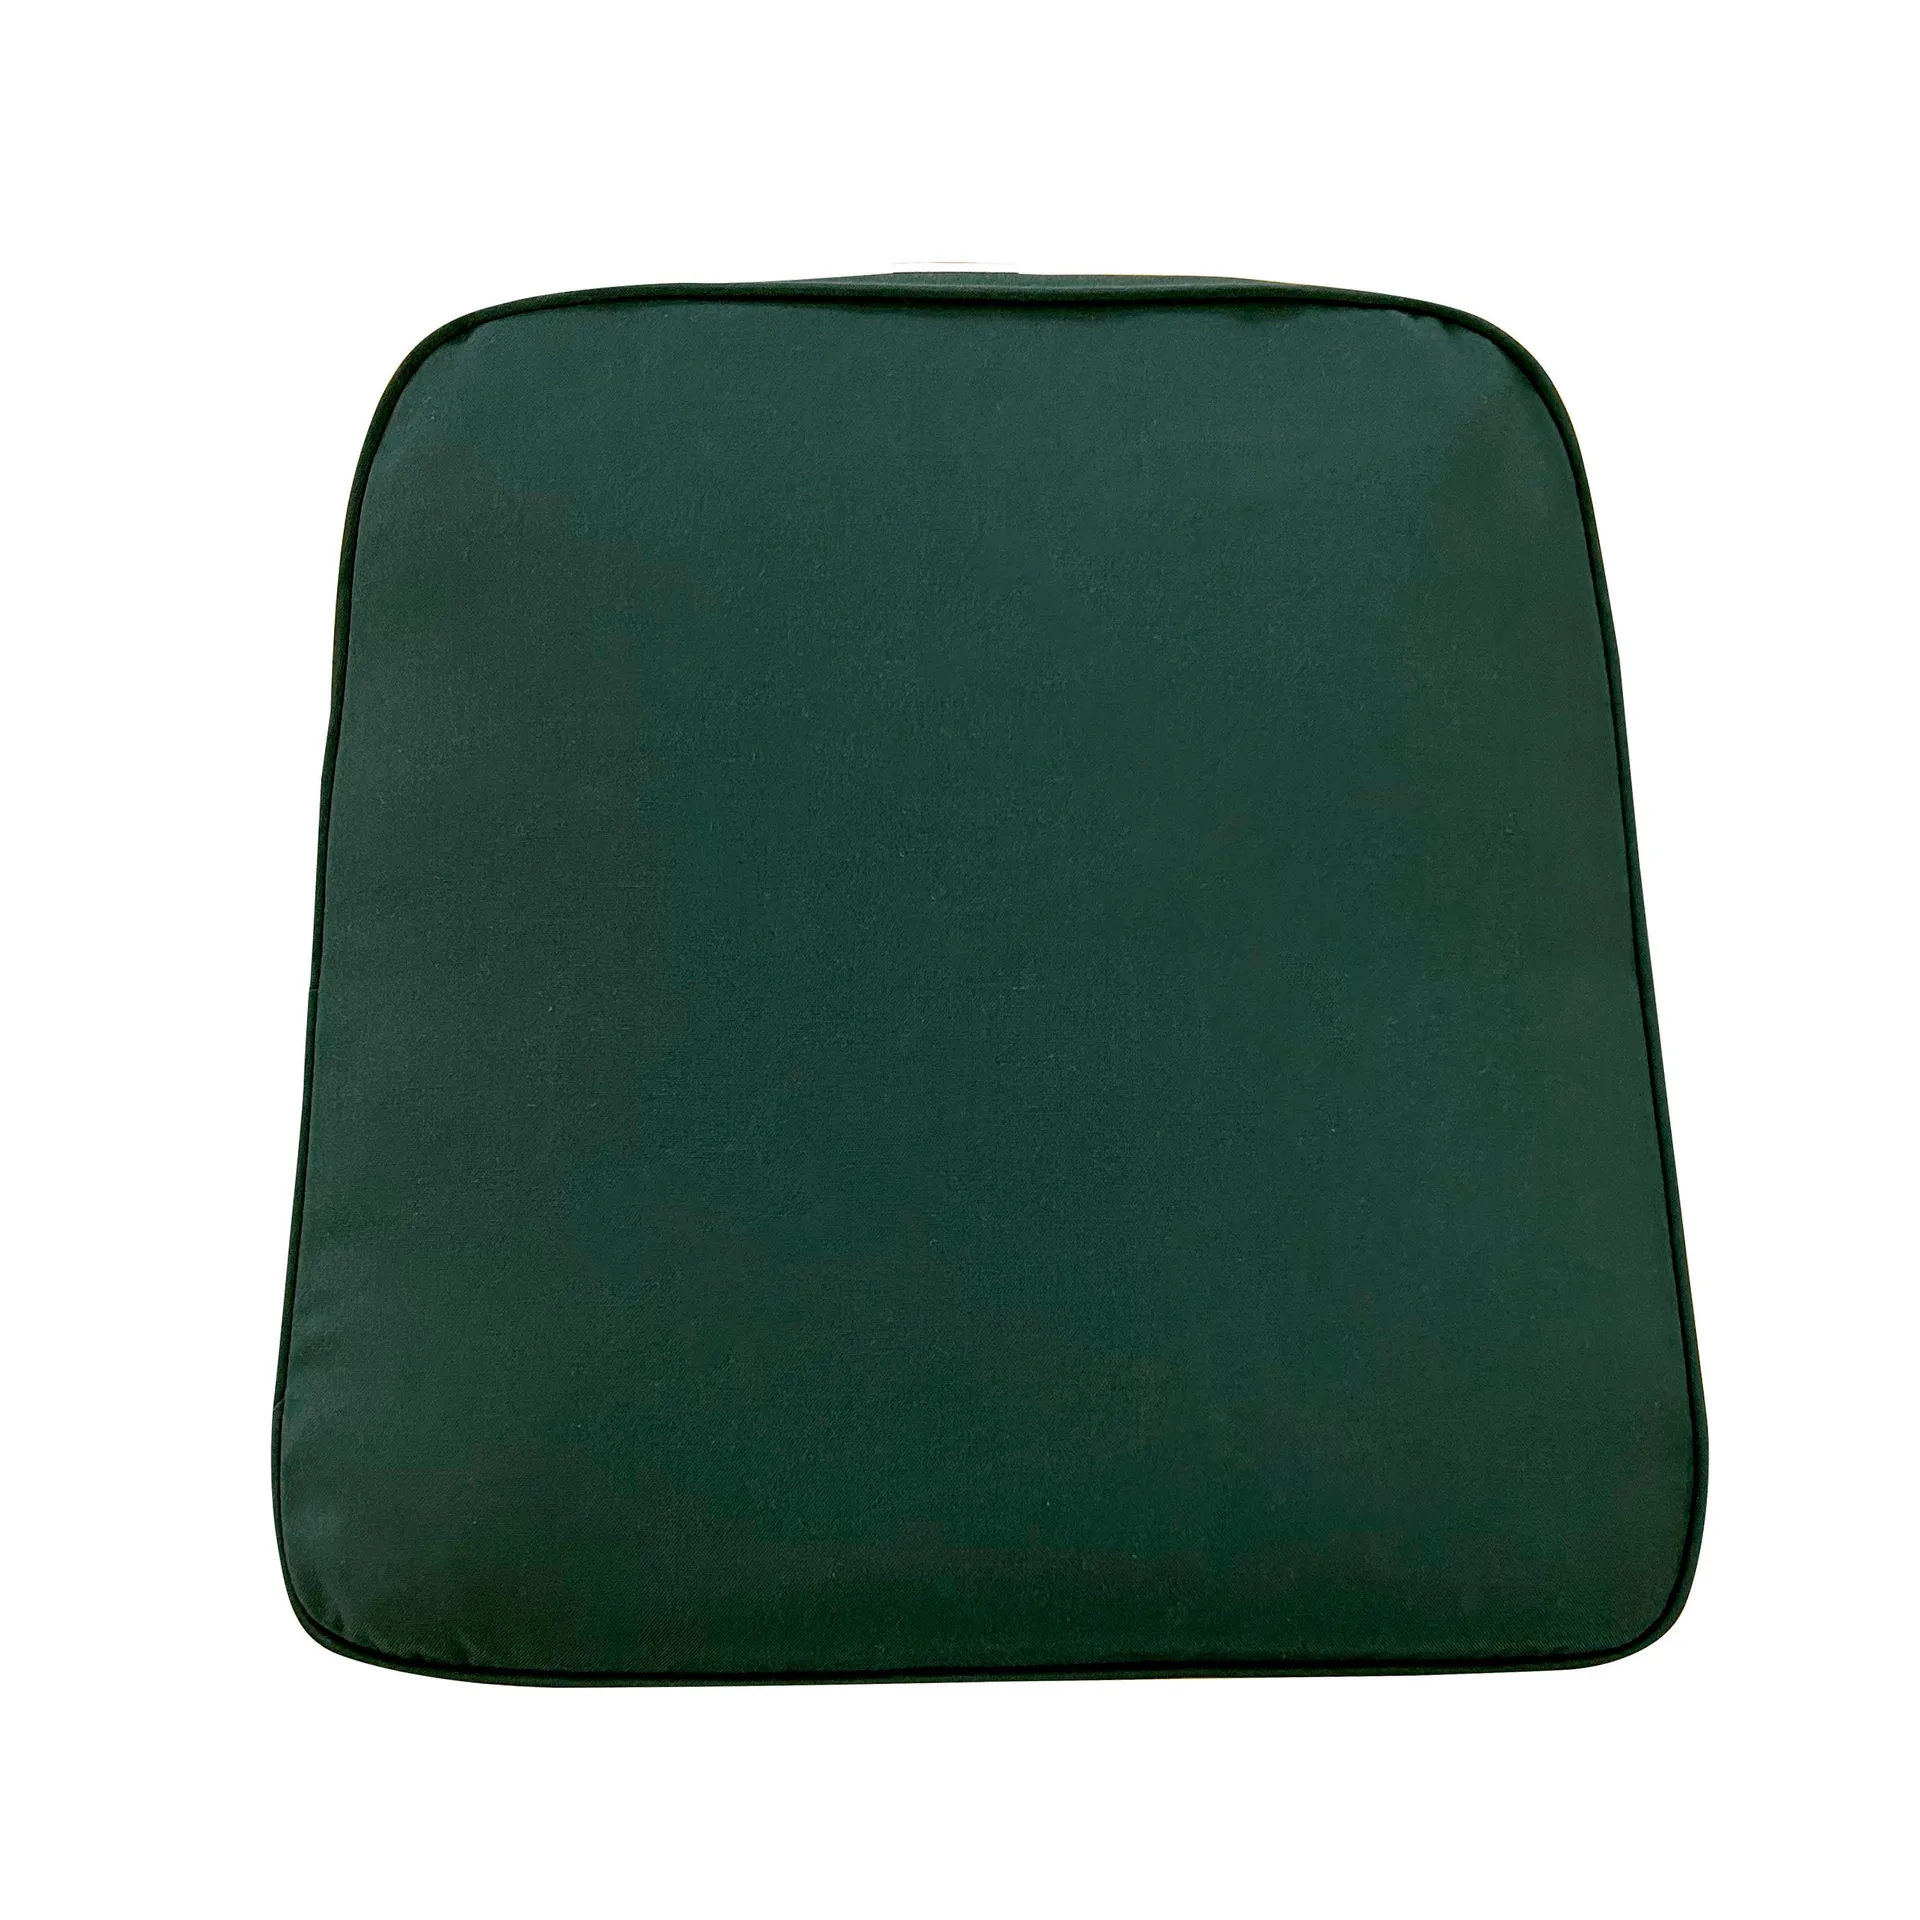 Deluxe Polyester Chair/Rocker Seat Cushion for Prospect Hill Furniture - Forest Green